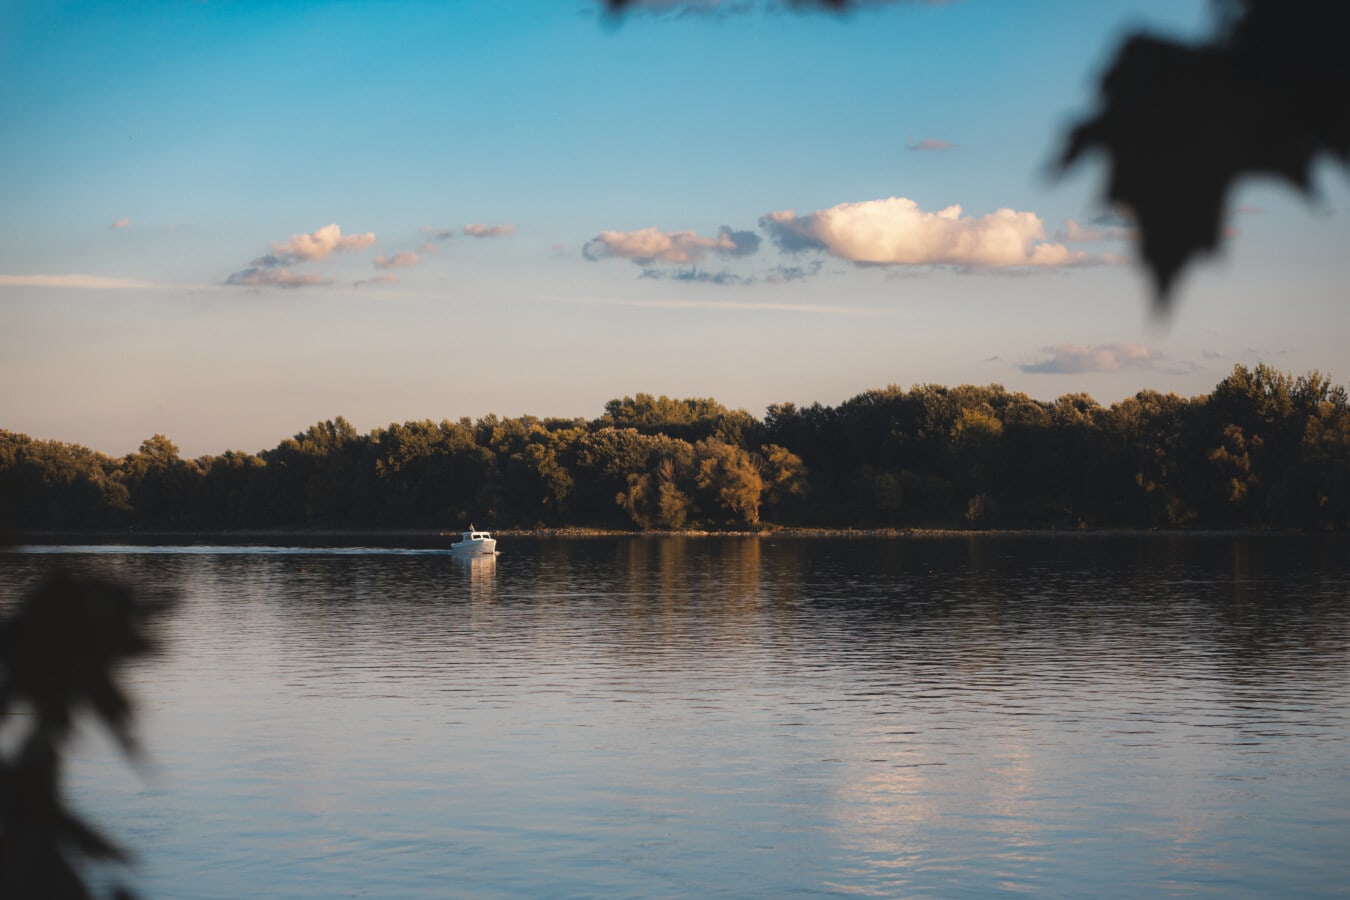 small, boat, calm, placid, lakeside, water, landscape, lake, nature, evening